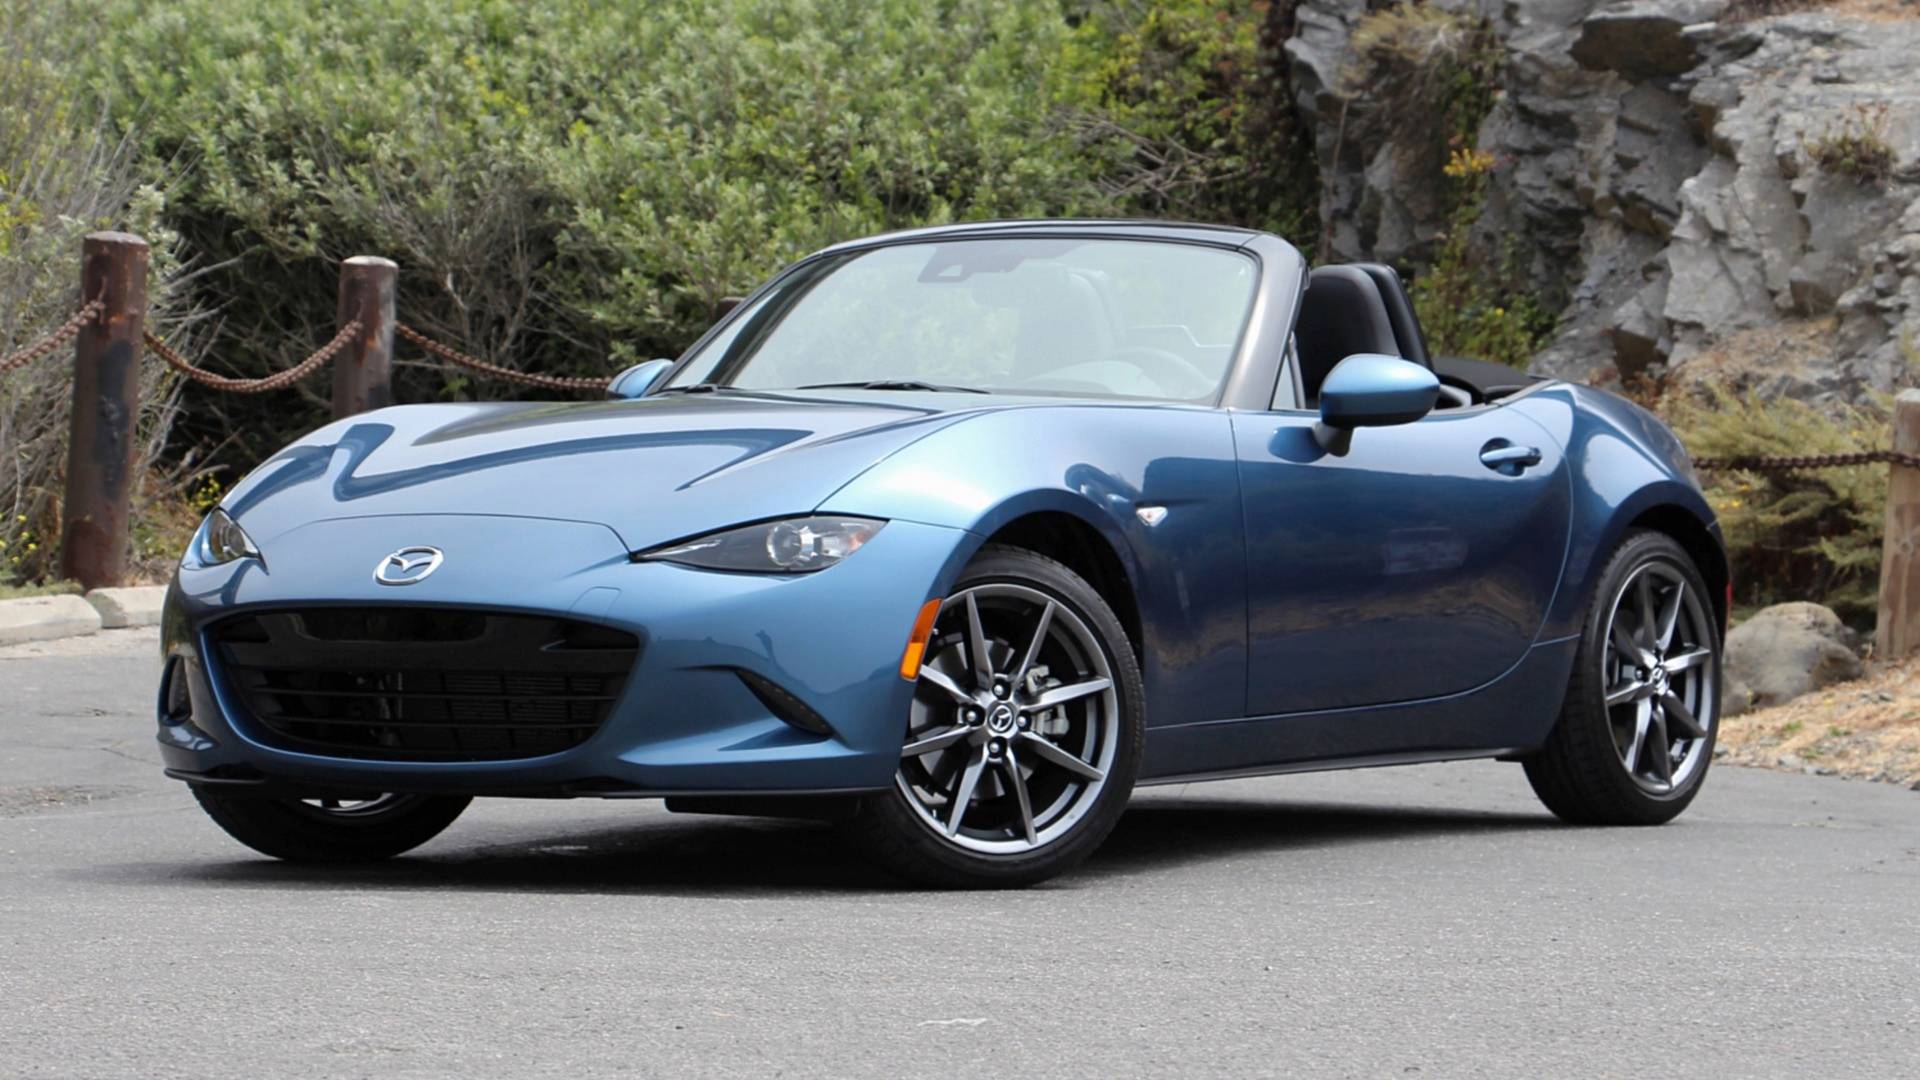 2019 Mazda MX-5 Miata First Drive: The Whole Package